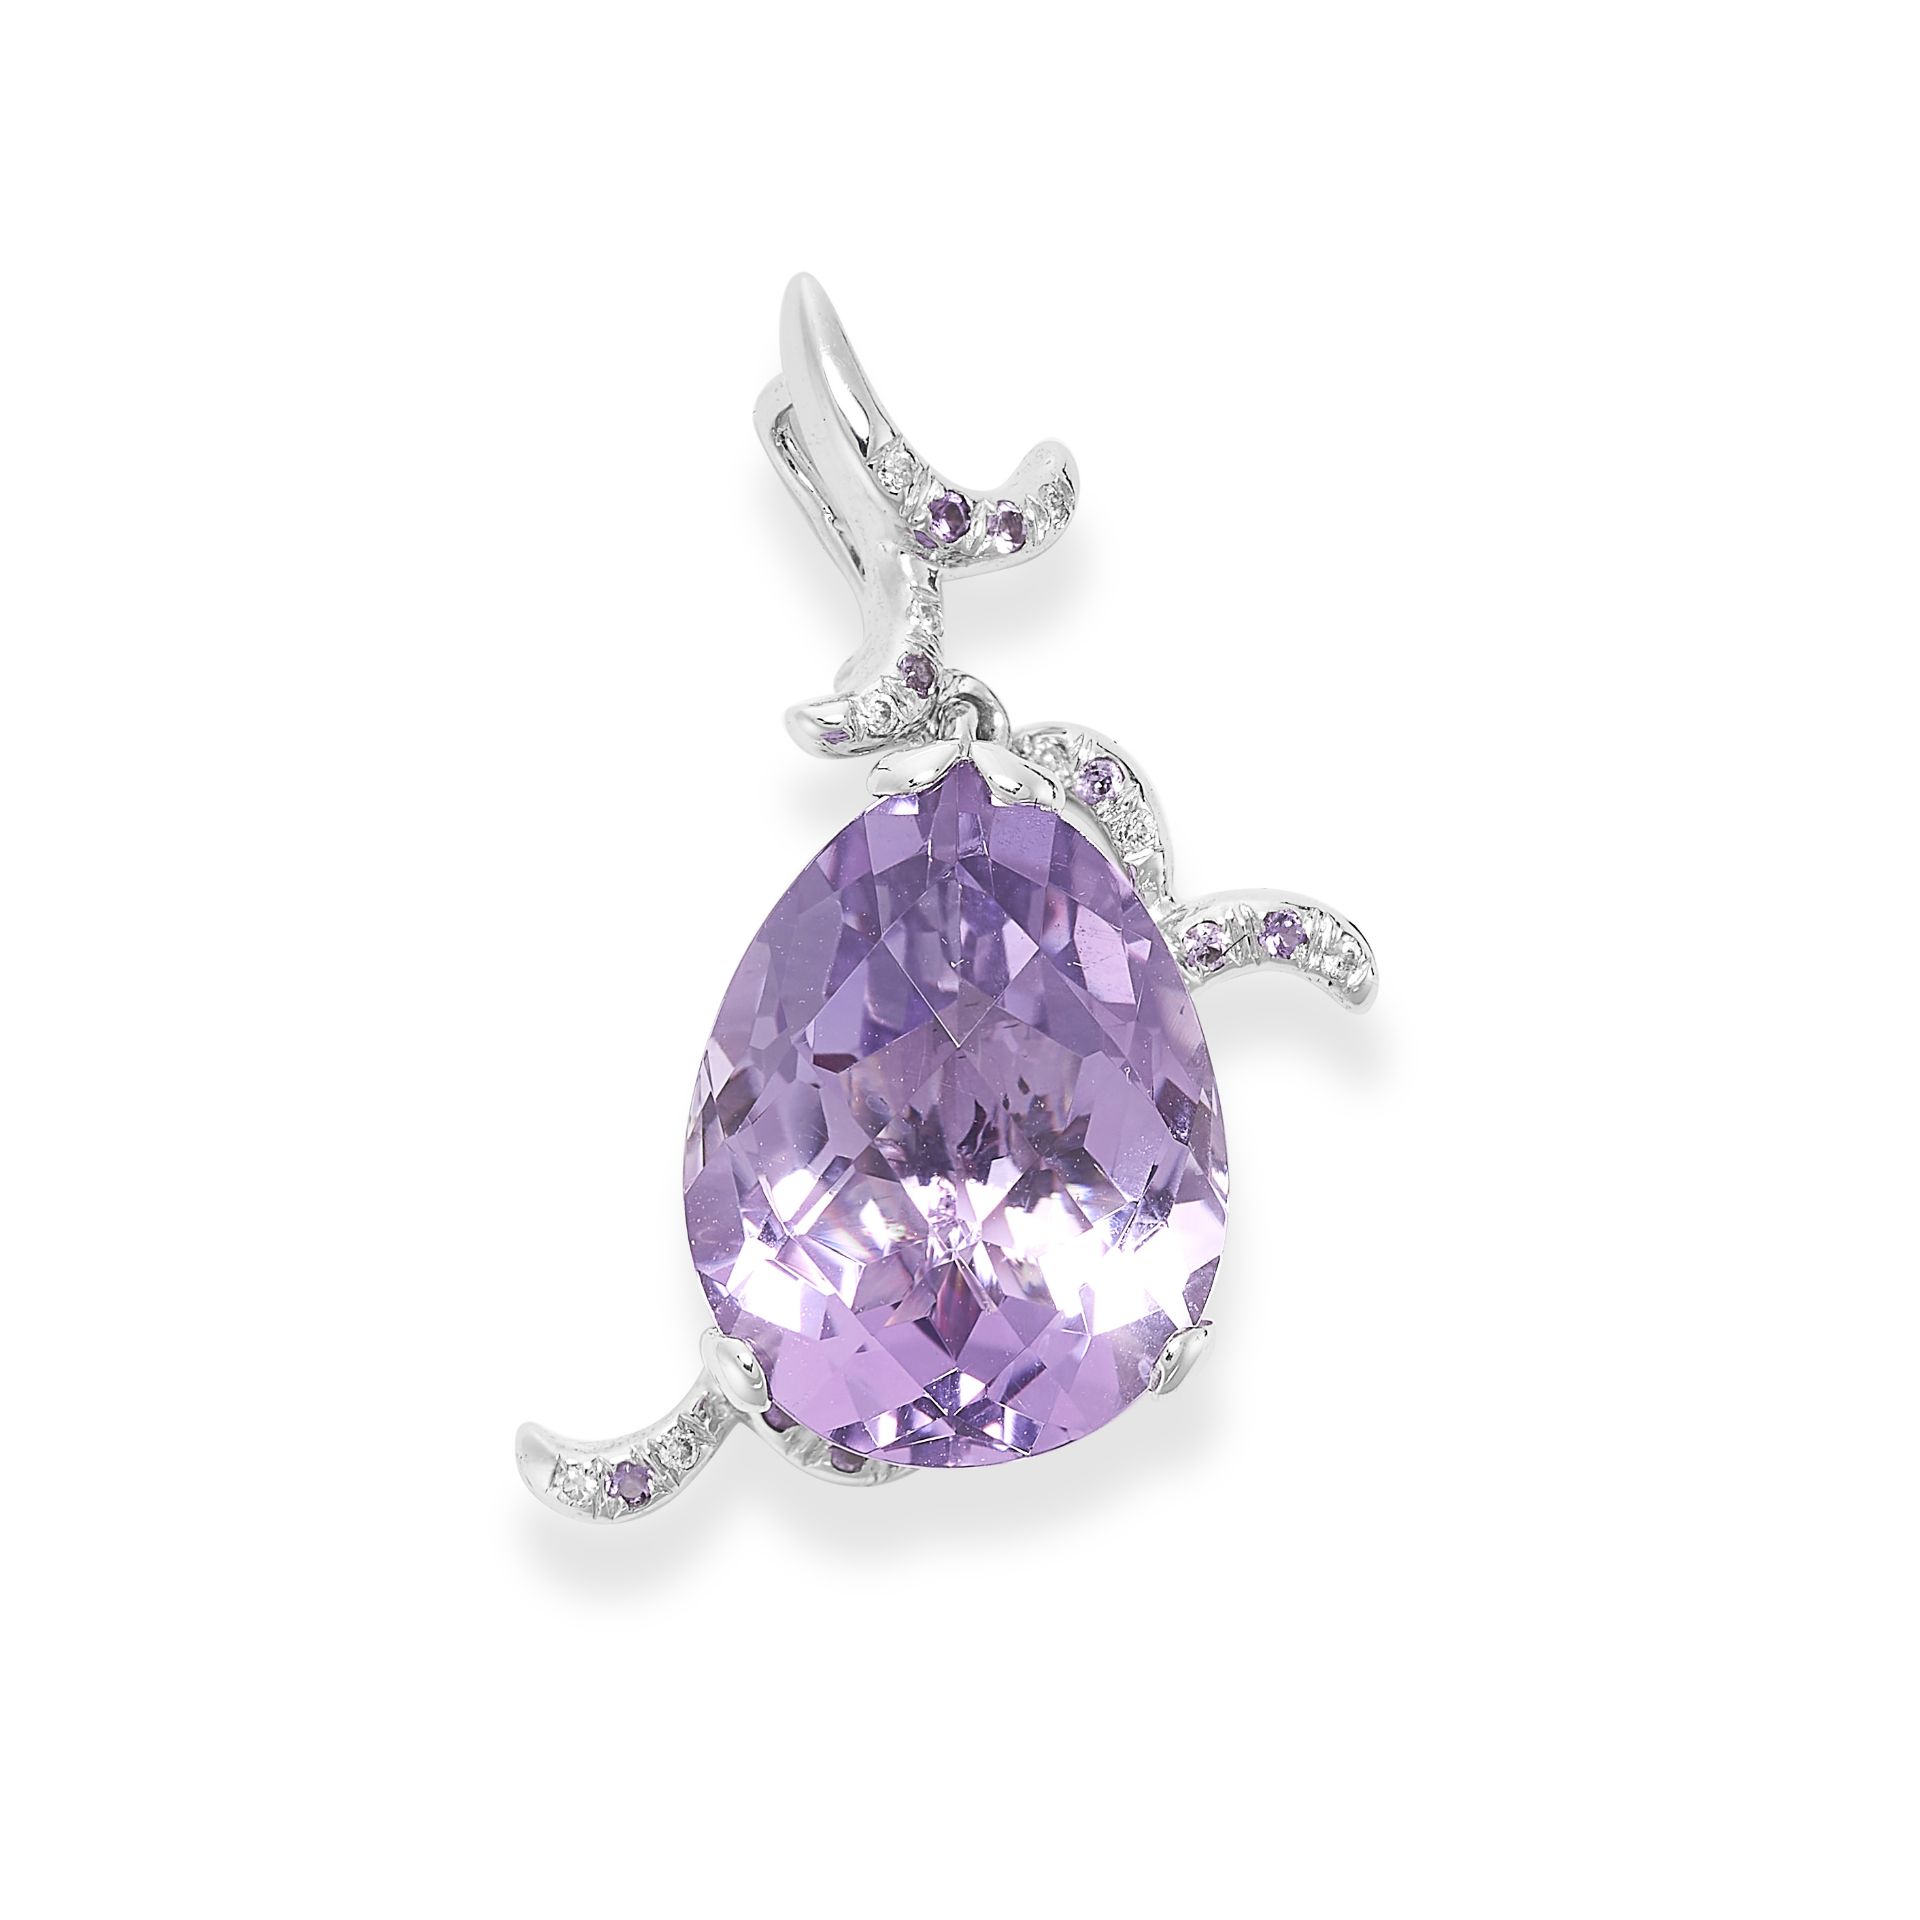 AN AMETHYST PENDANT set with a fancy cut amethyst accented by a scrolling design set with diamonds